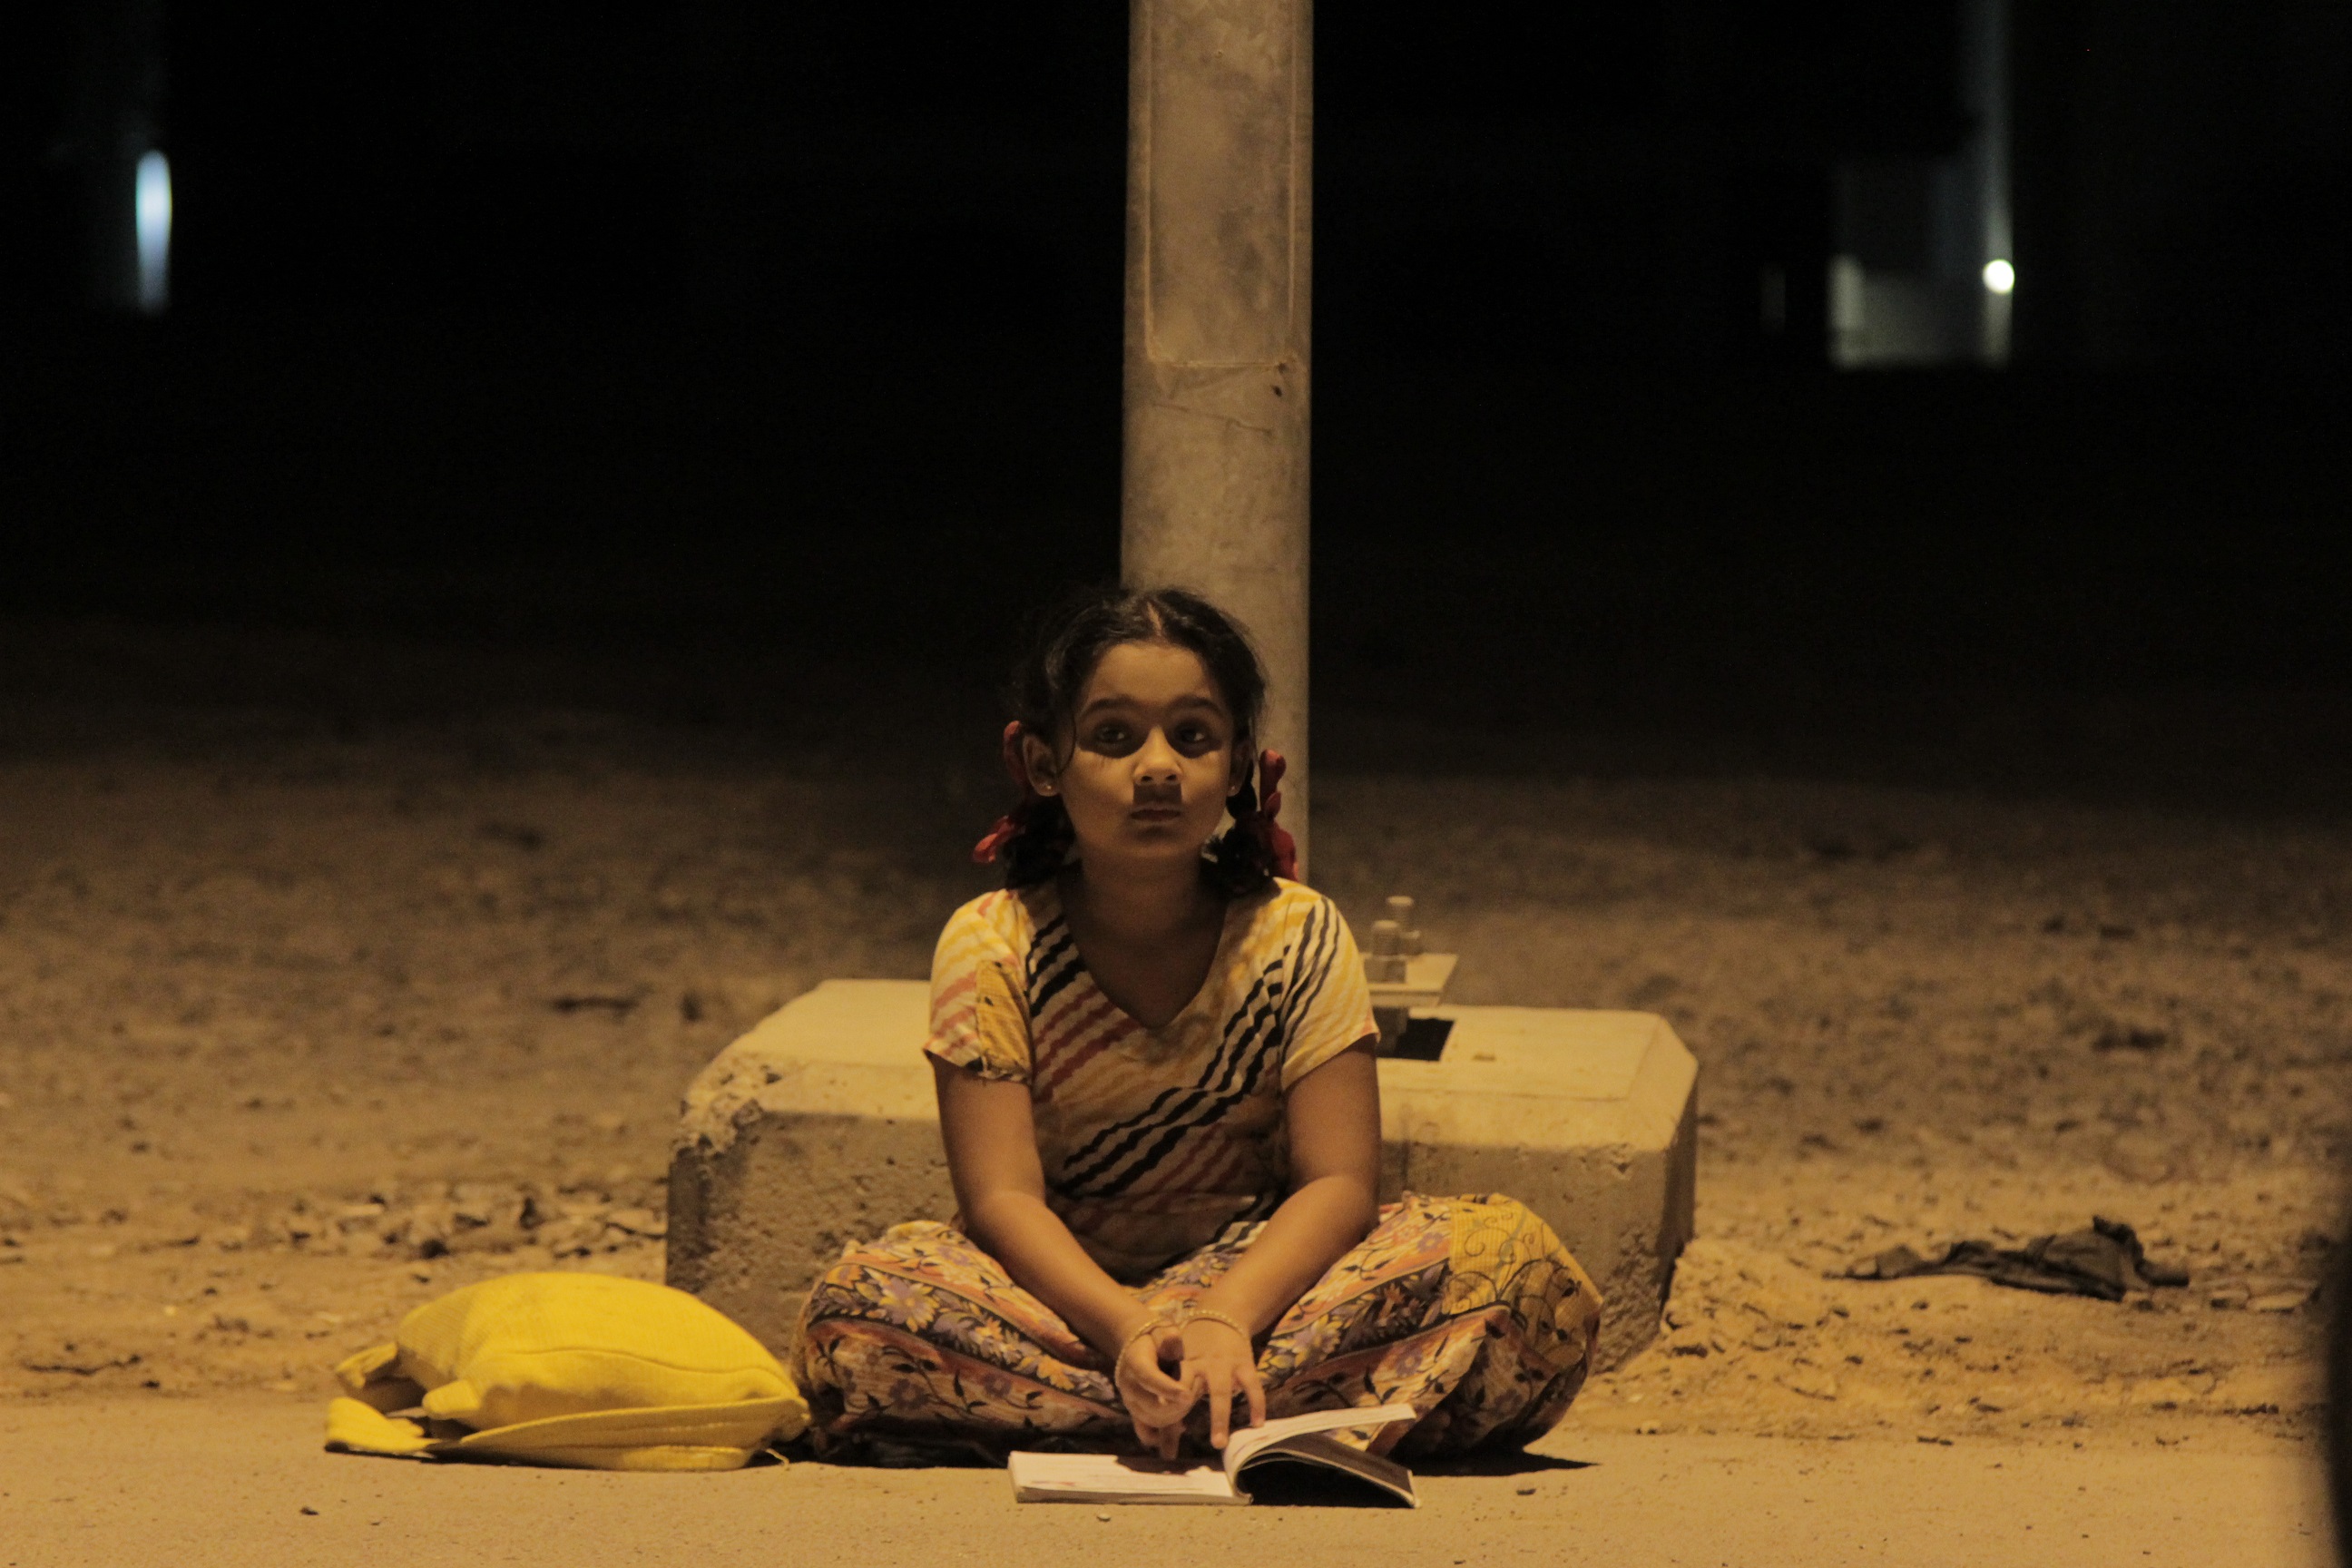 Film shot in Oman to be shown at Indian, Norway festivals